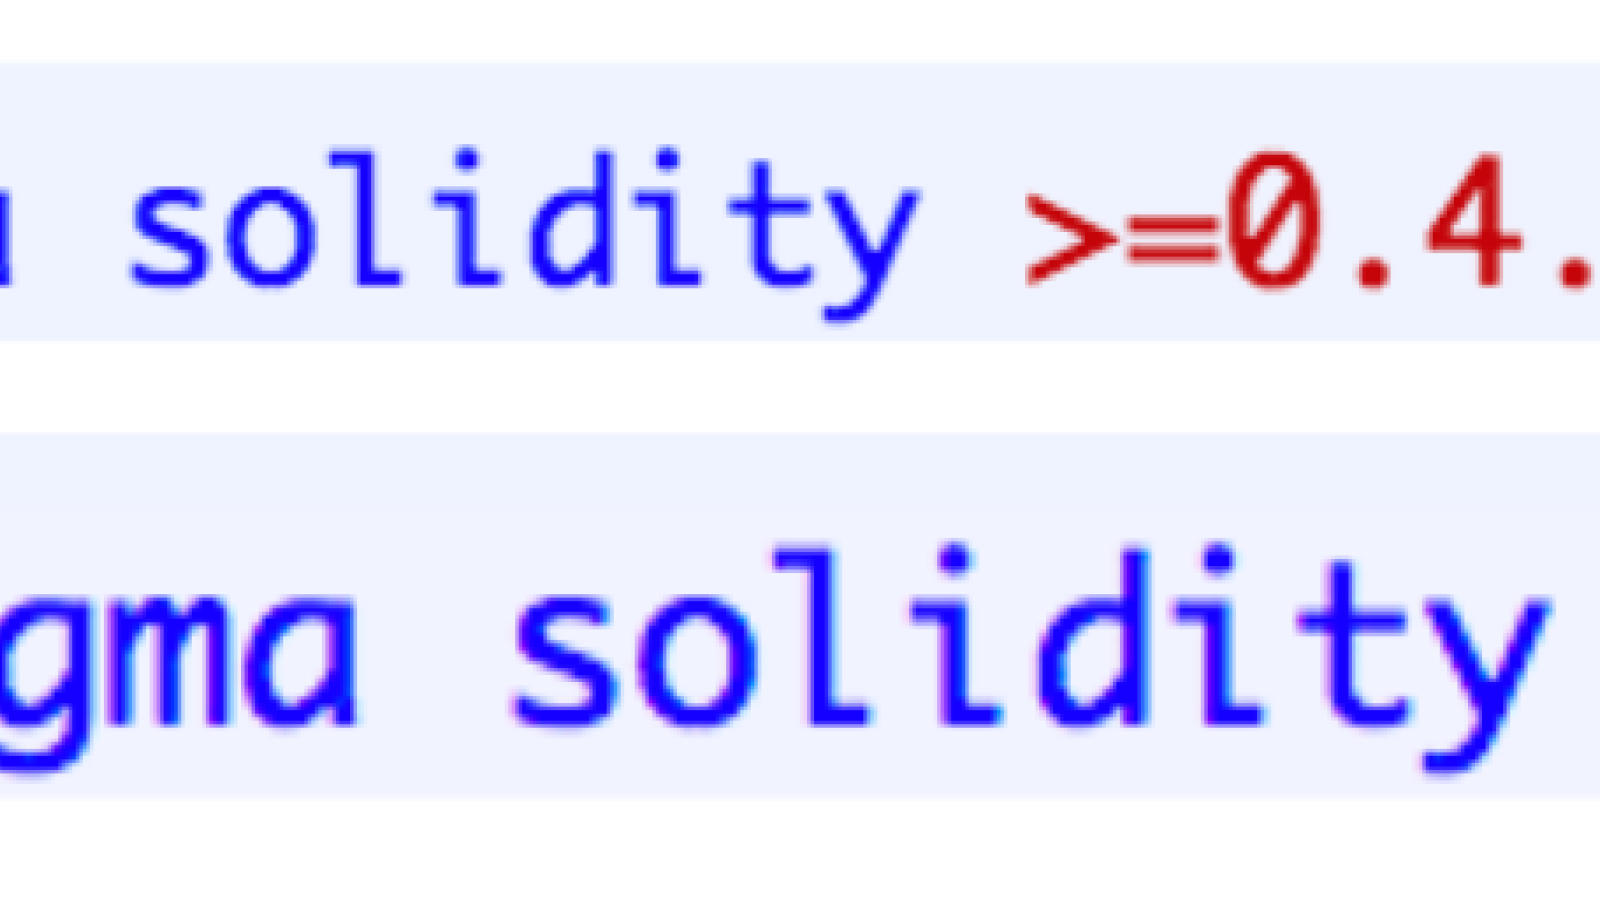 2 types of specifying the version of Solidity